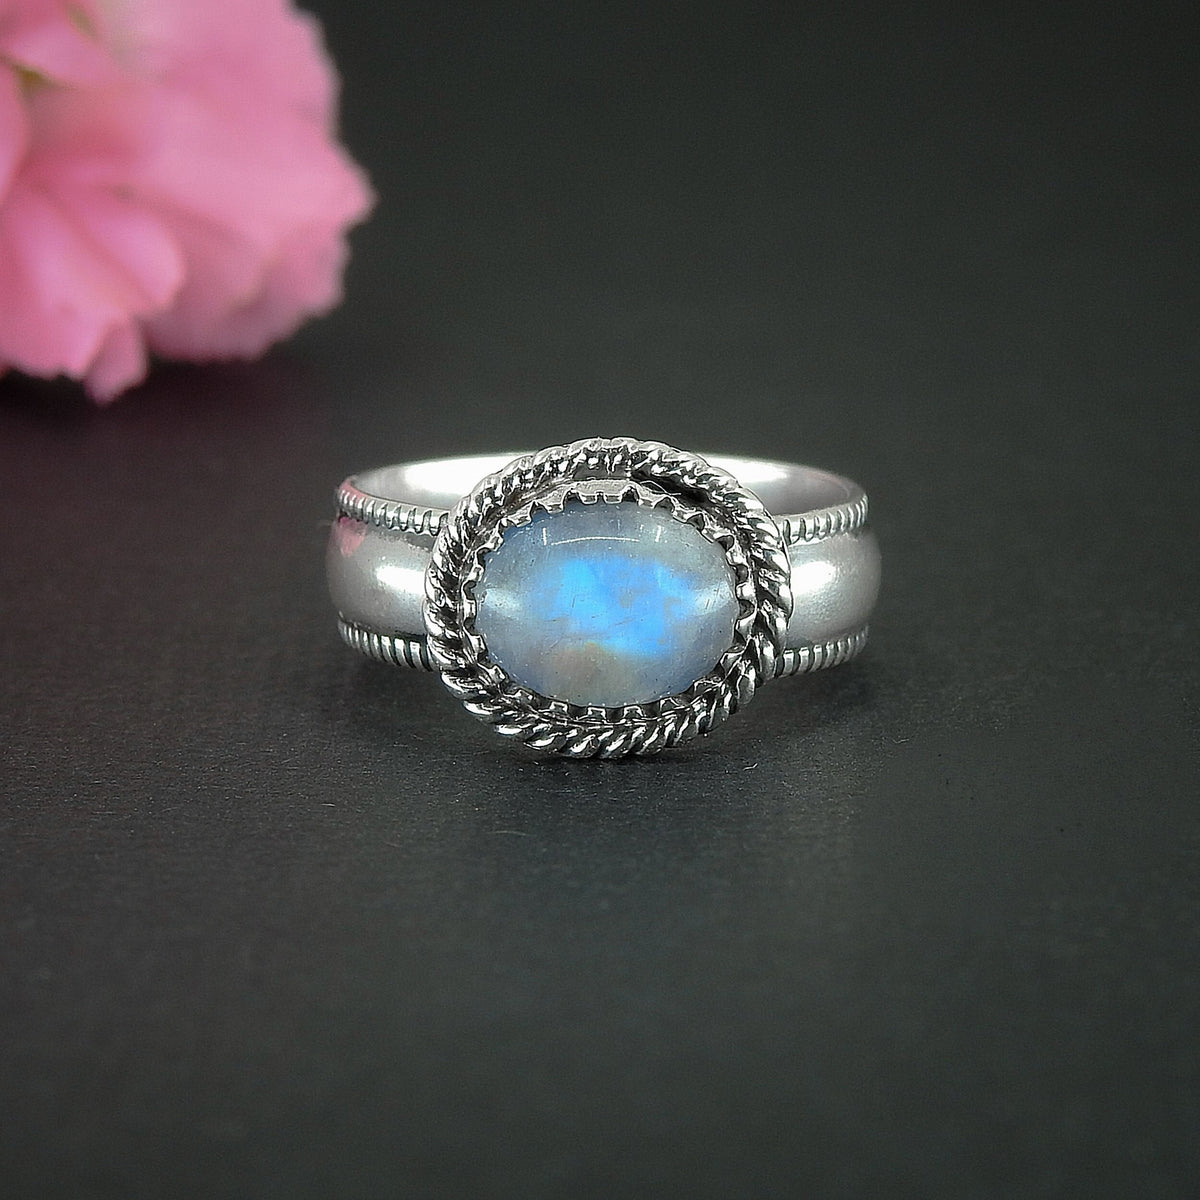 Moonstone Ring - Size 6 to 6 1/4 